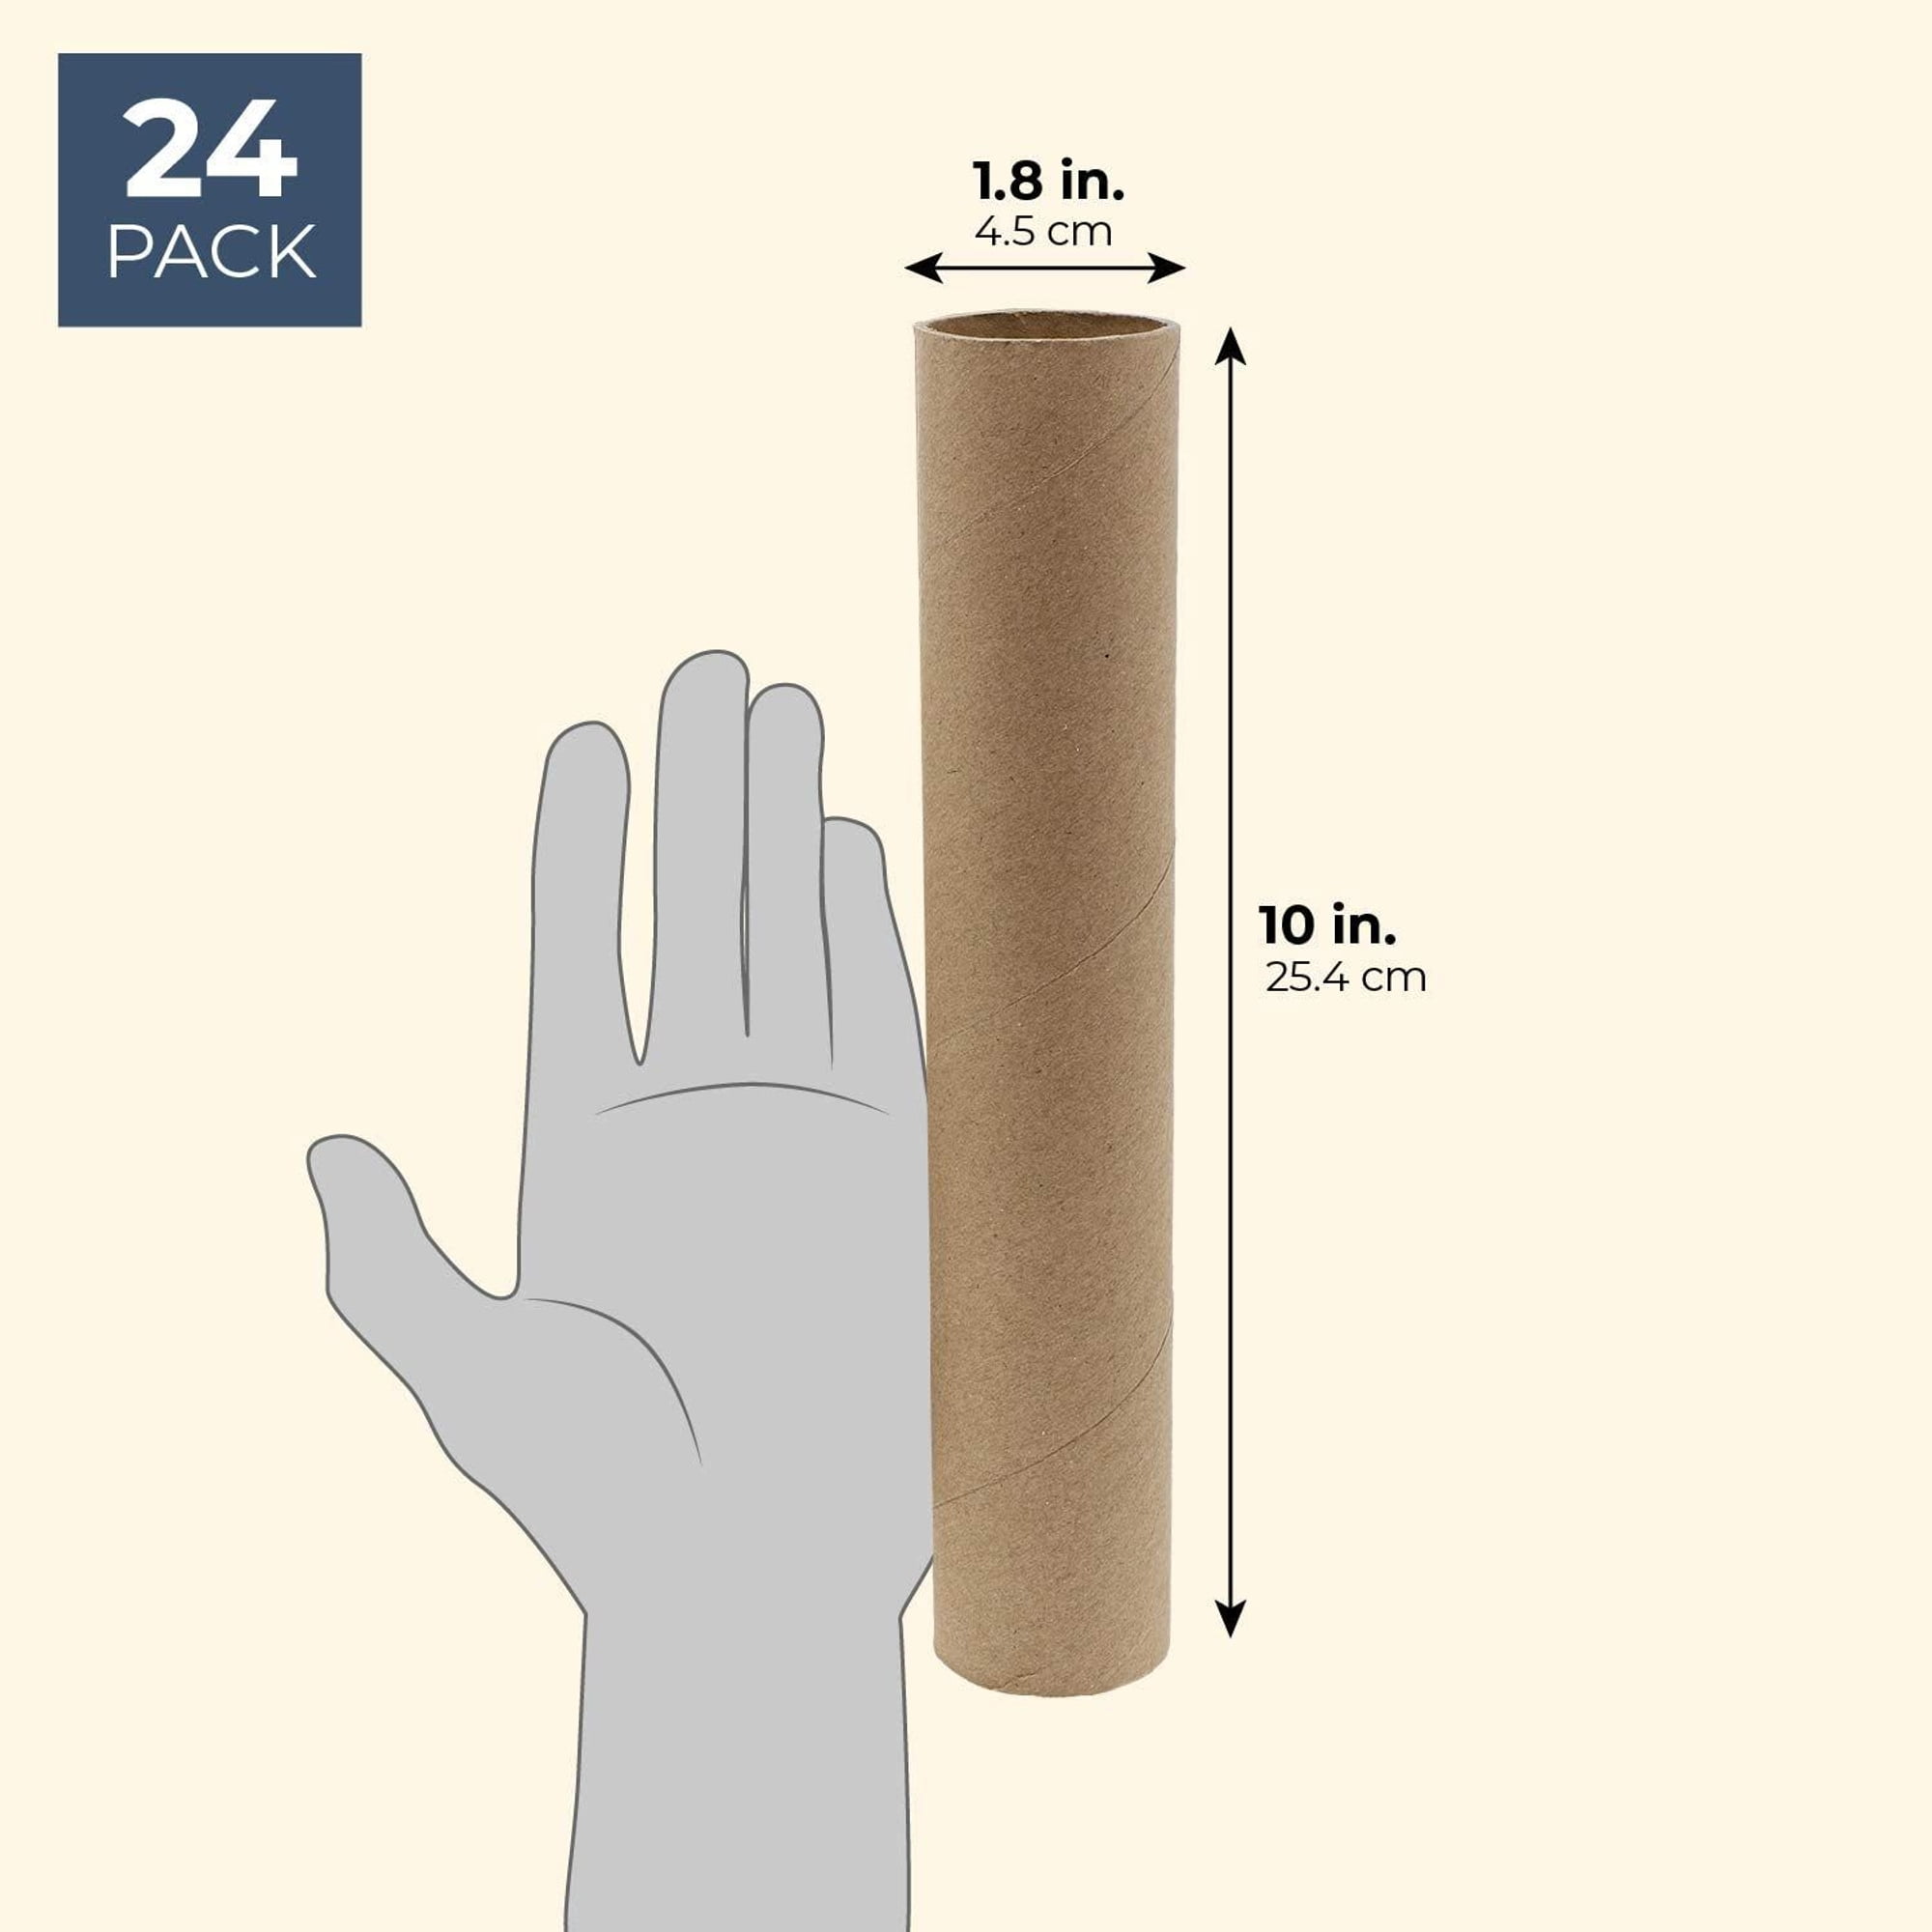 24 Pack Brown Cardboard Tubes for Crafts, Empty Paper Towel Rolls for DIY  Projects, Classrooms (1.7x10 in) 